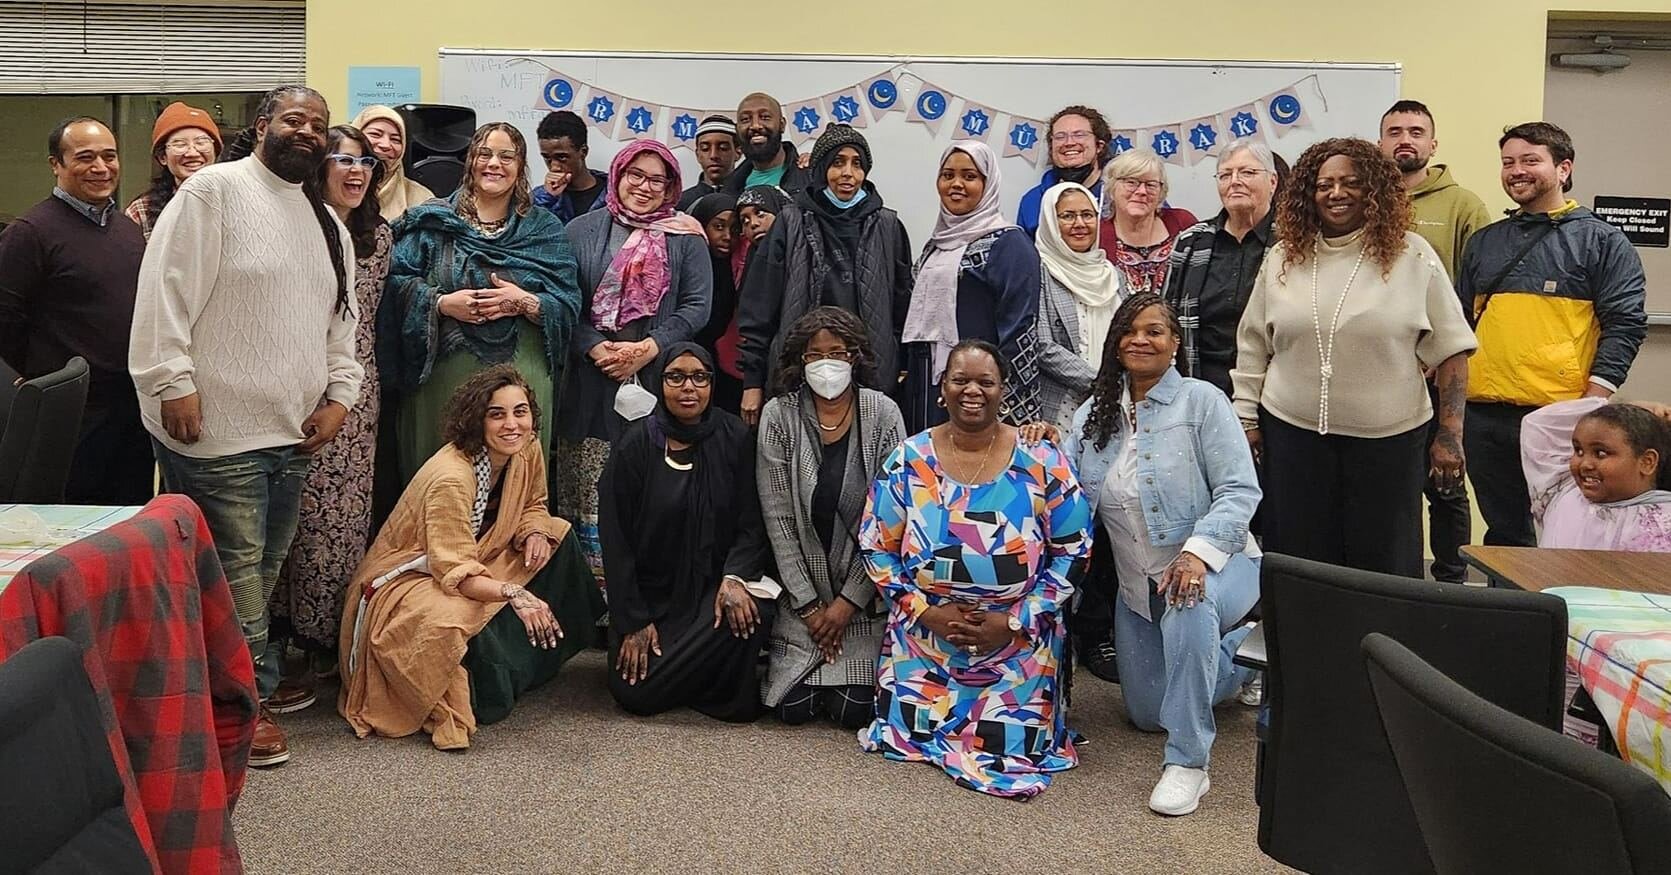 Great to see everyone at the third annual @educationminnesota iftar! Let's continue to celebrate our shared humanity and work towards building an inclusive community for all our students and educators. Gratitude to all for a wonderful gathering!